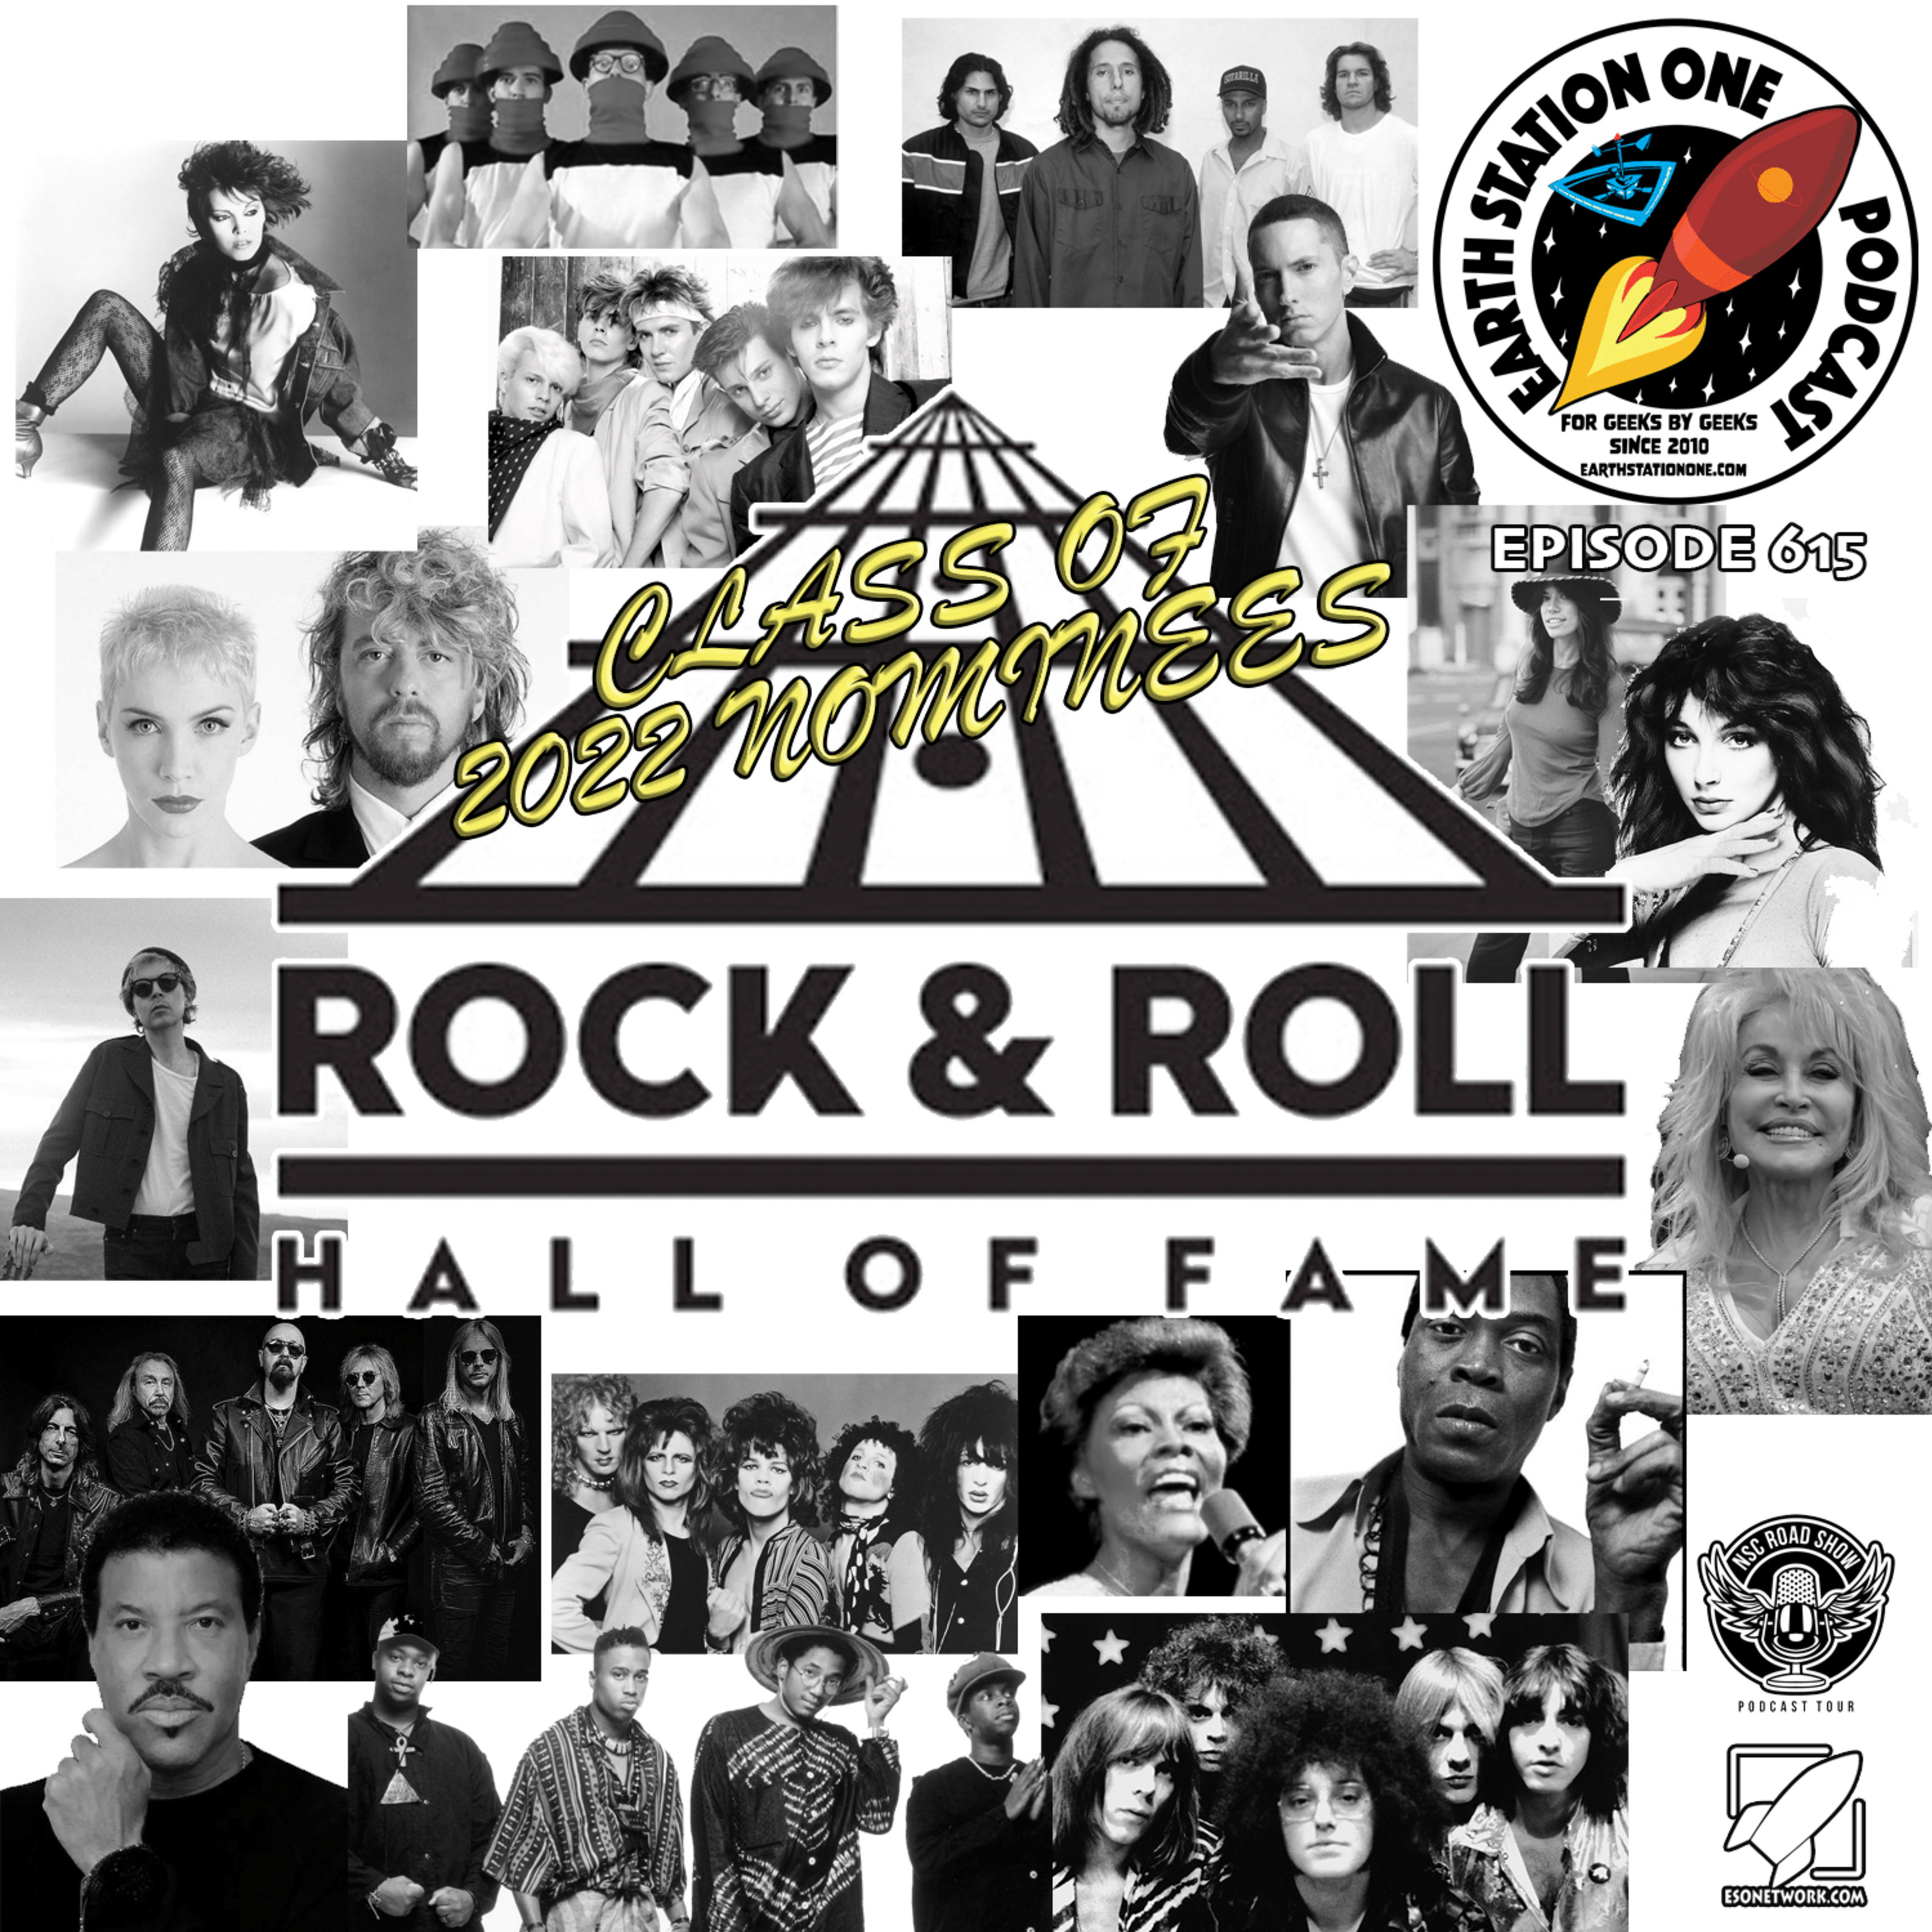 The Earth Station One Podcast - The 2022 Rock & Roll Hall of Fame Nominees